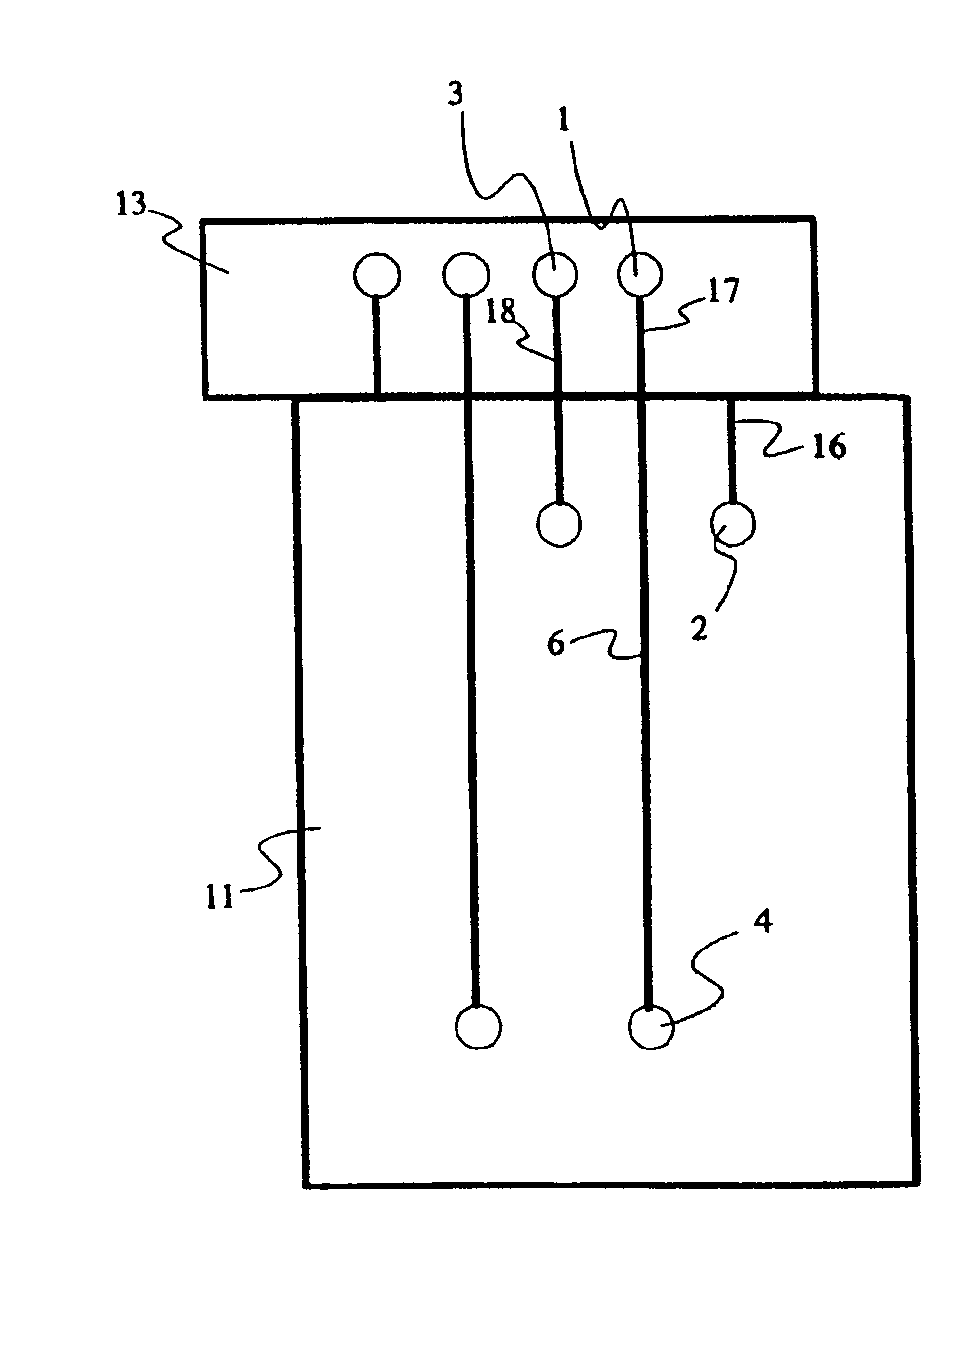 Method and apparatus for reproducible sample injection on microfabricated devices